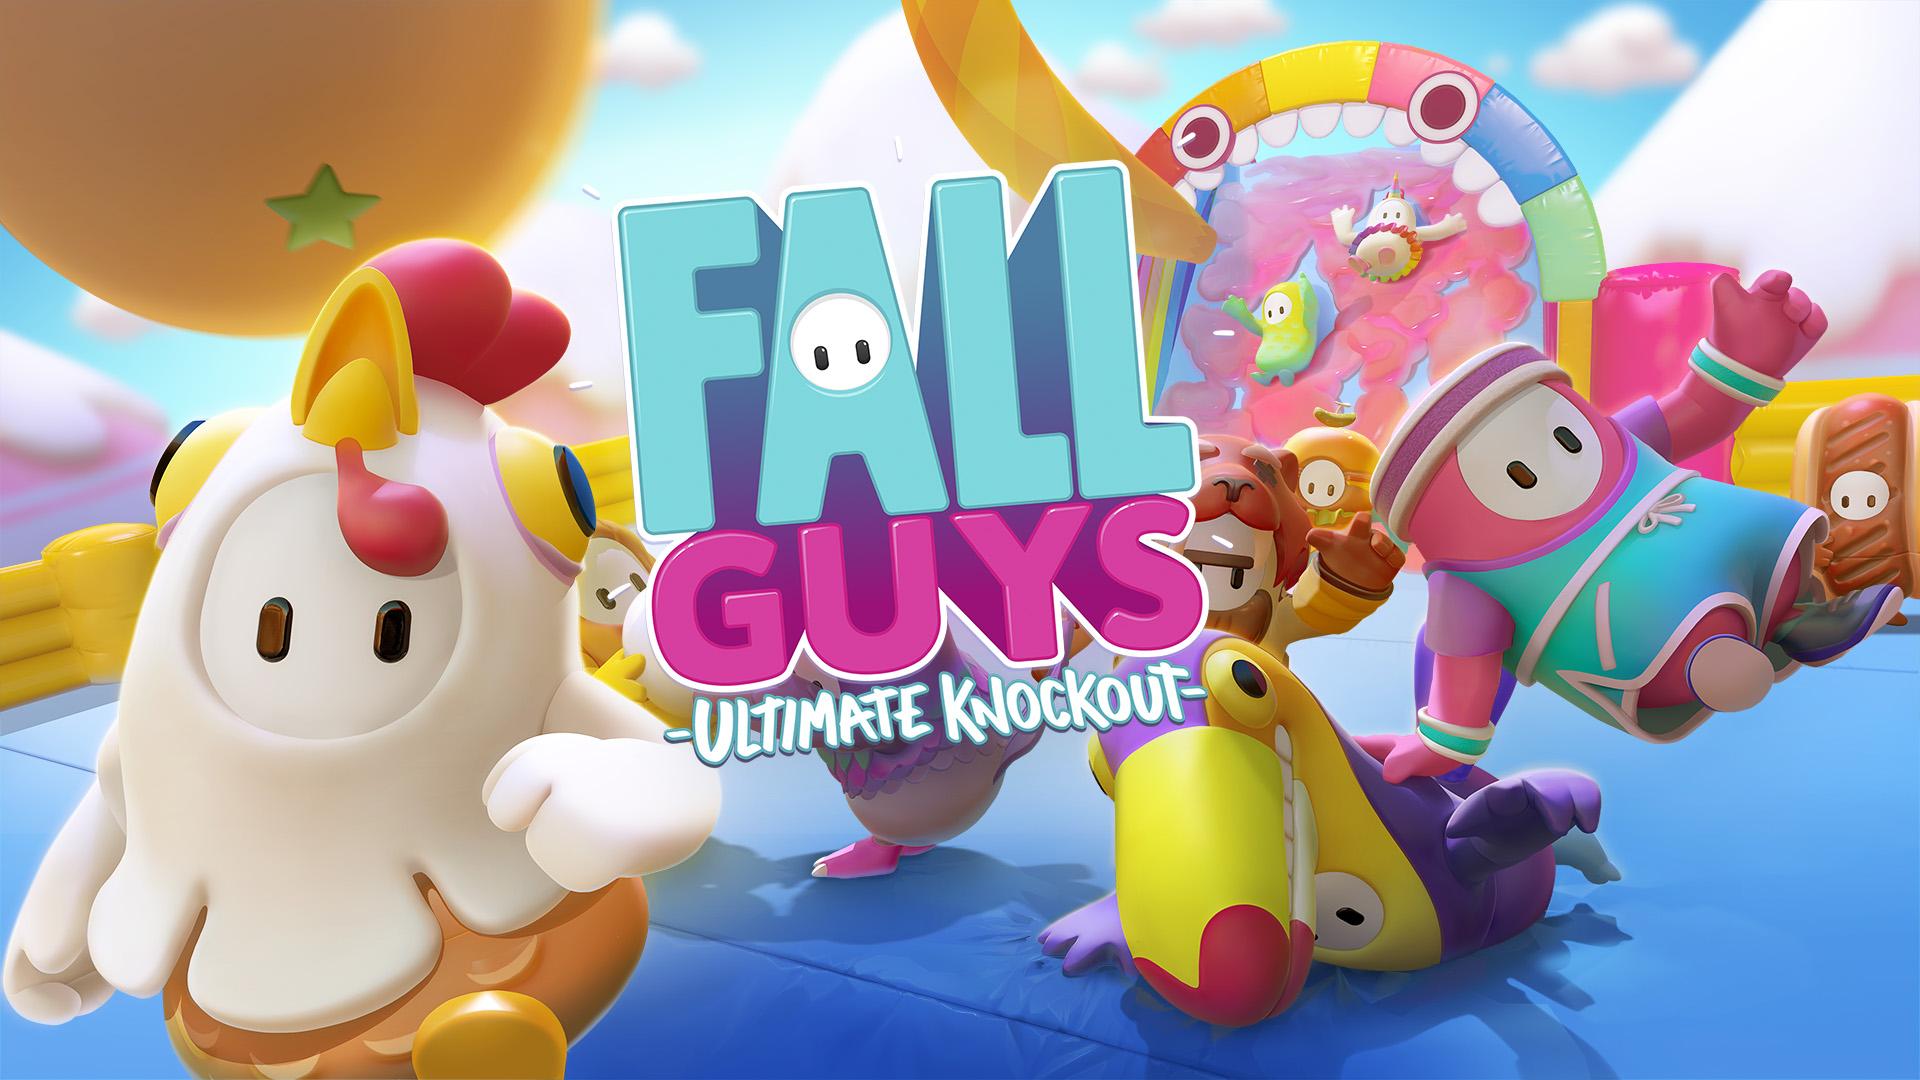 Pc Ps4向けバトルロイヤルゲーム Fall Guys Ultimate Knockout が配信開始 Ps Plusではフリープレイに